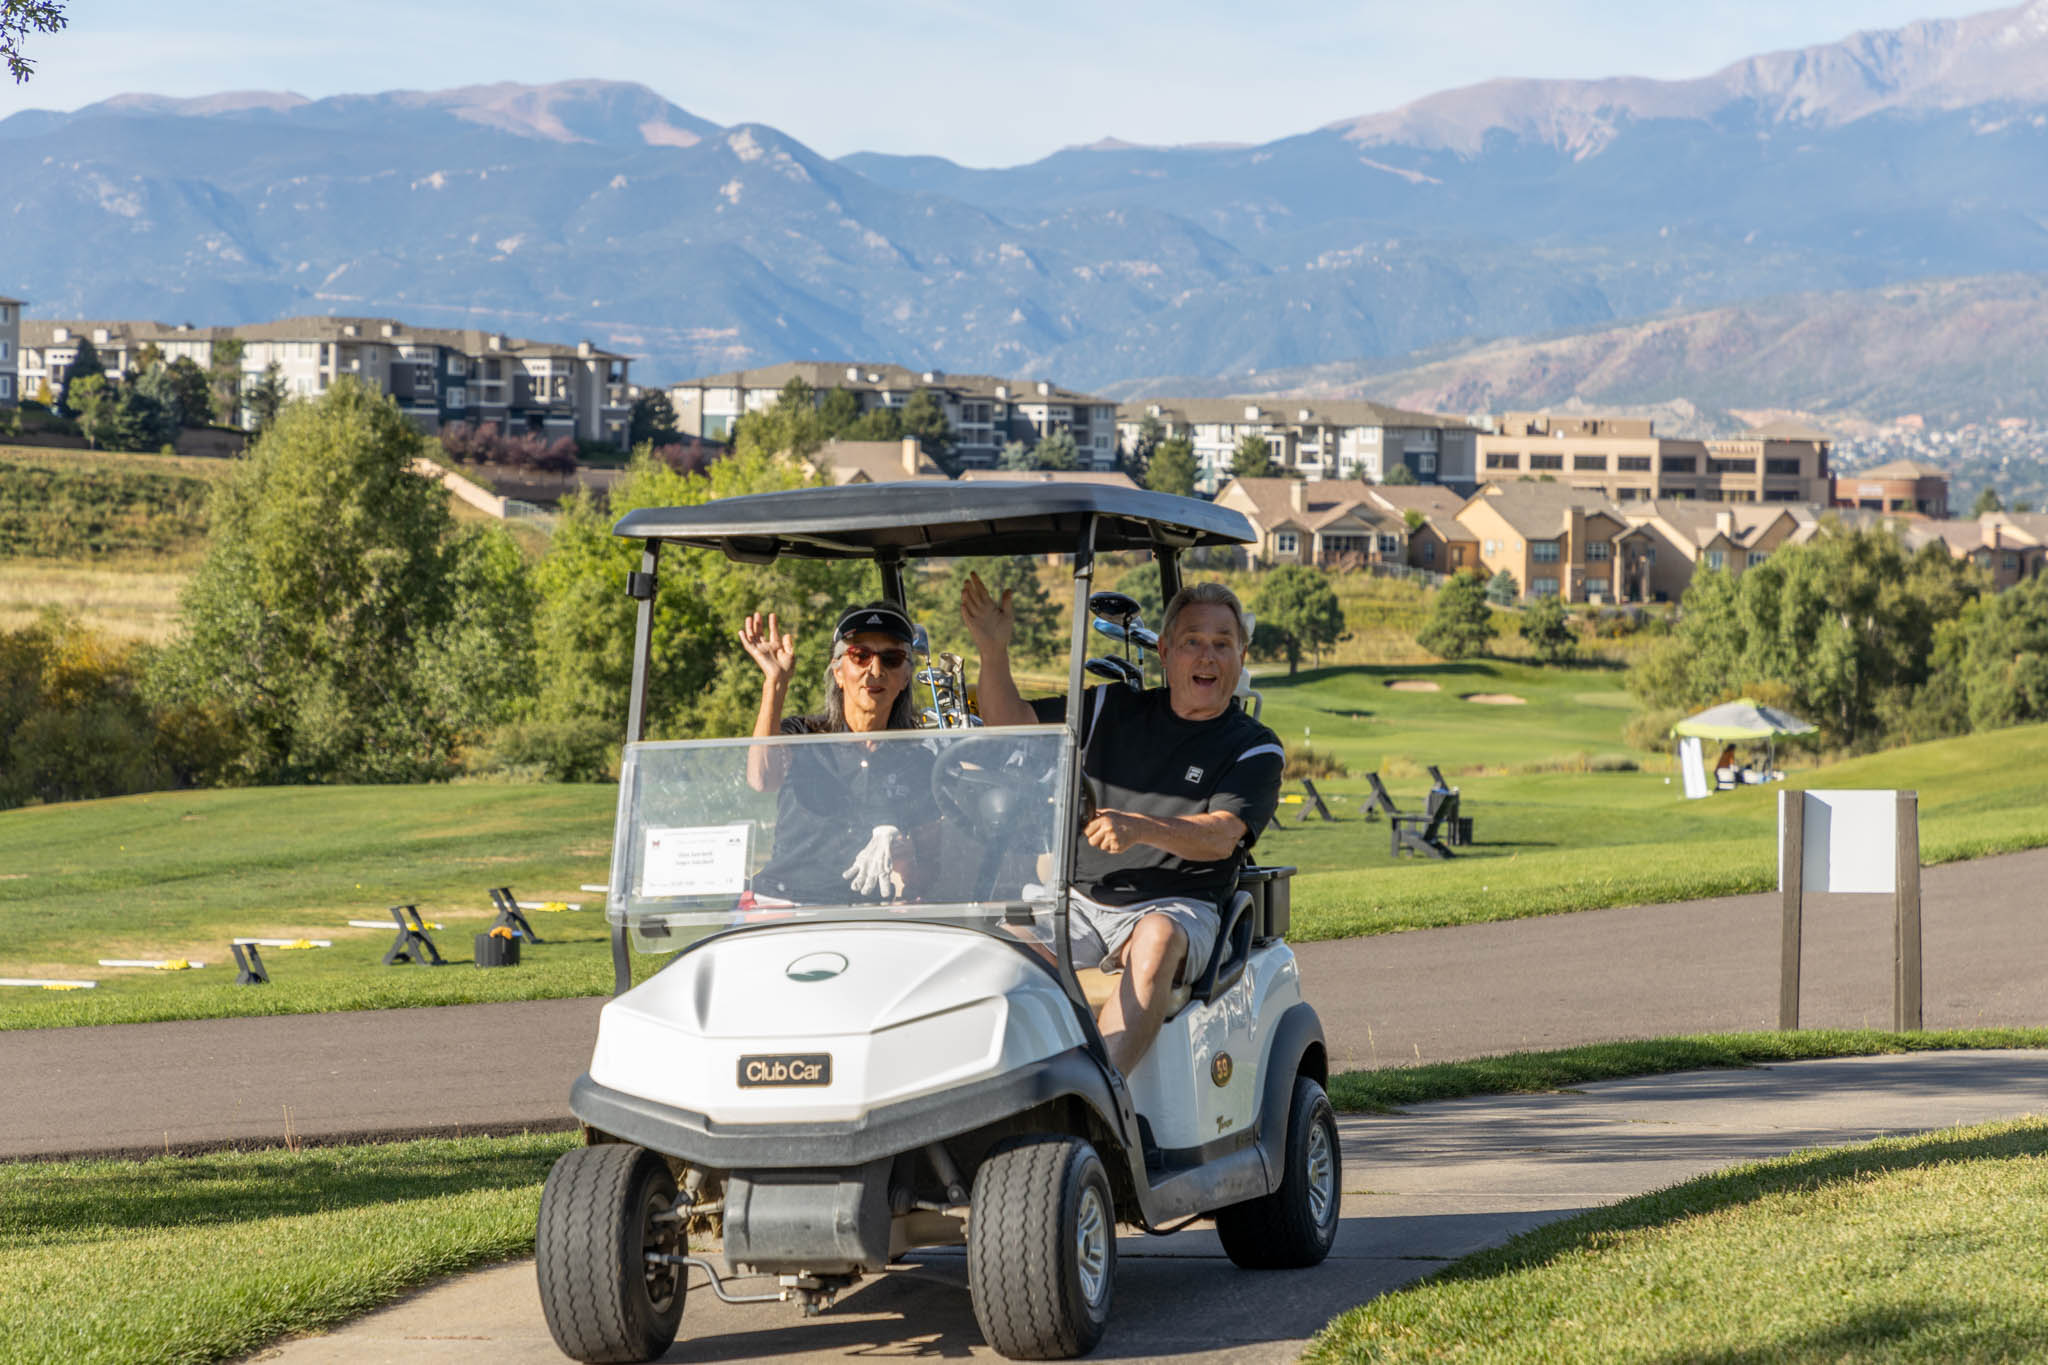 Dan and Joyce Satchell of Footprint Floors riding in a golf cart with mountains in the background at Pine Creek Golf Club in Colorado Springs at the Heartland Connect Golf Tournament